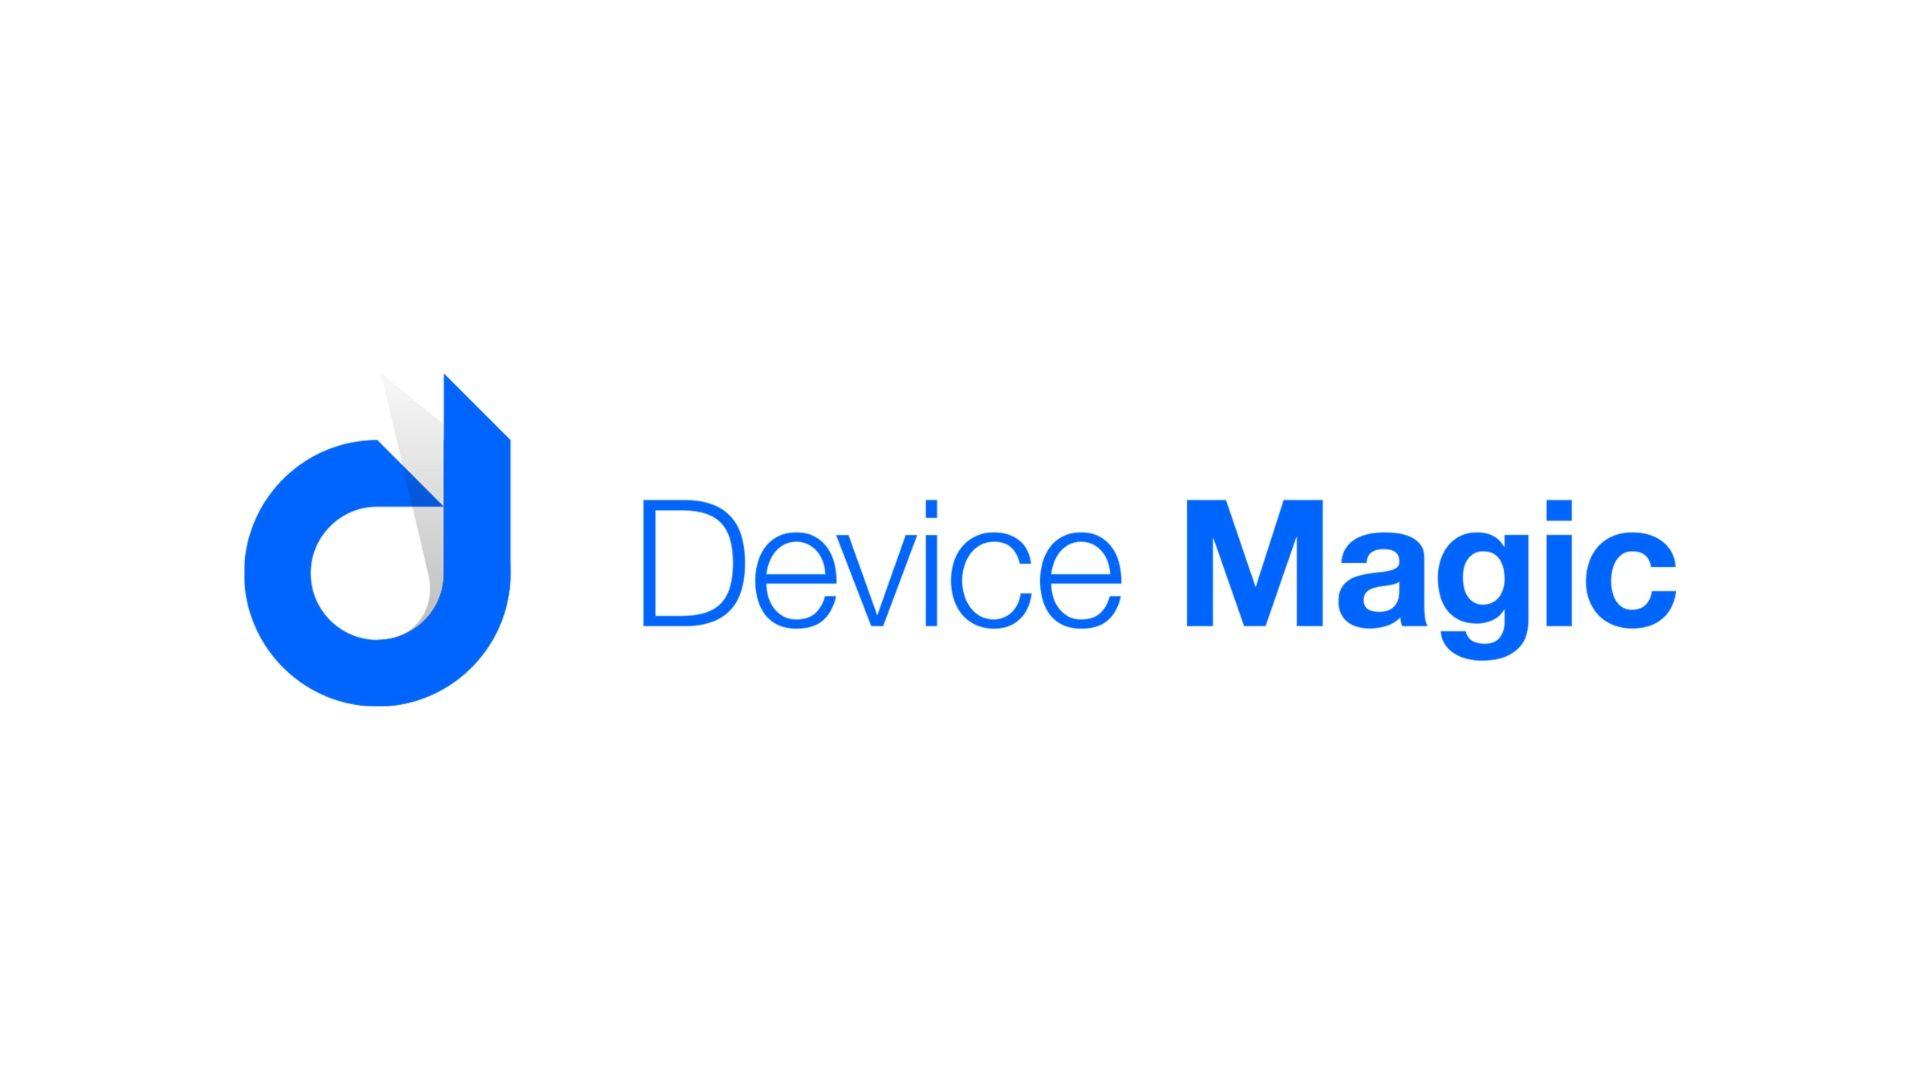 Device Logo - Mobile Forms Software and Data Collection Solution - Device Magic